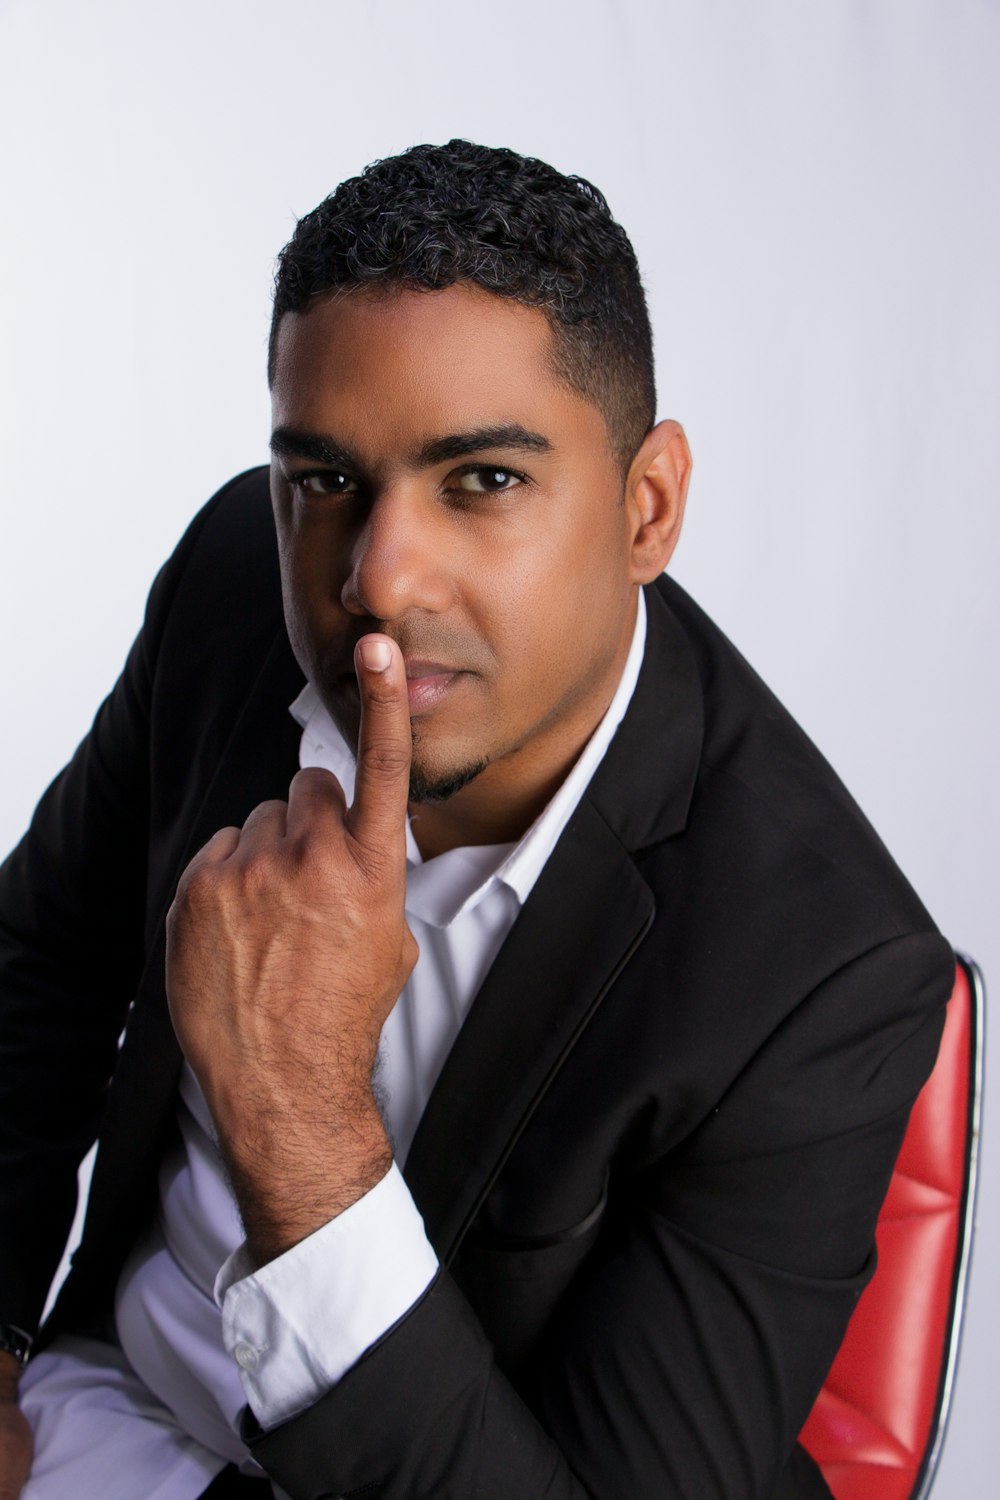 a man in a suit sitting down and pointing his finger at the camera